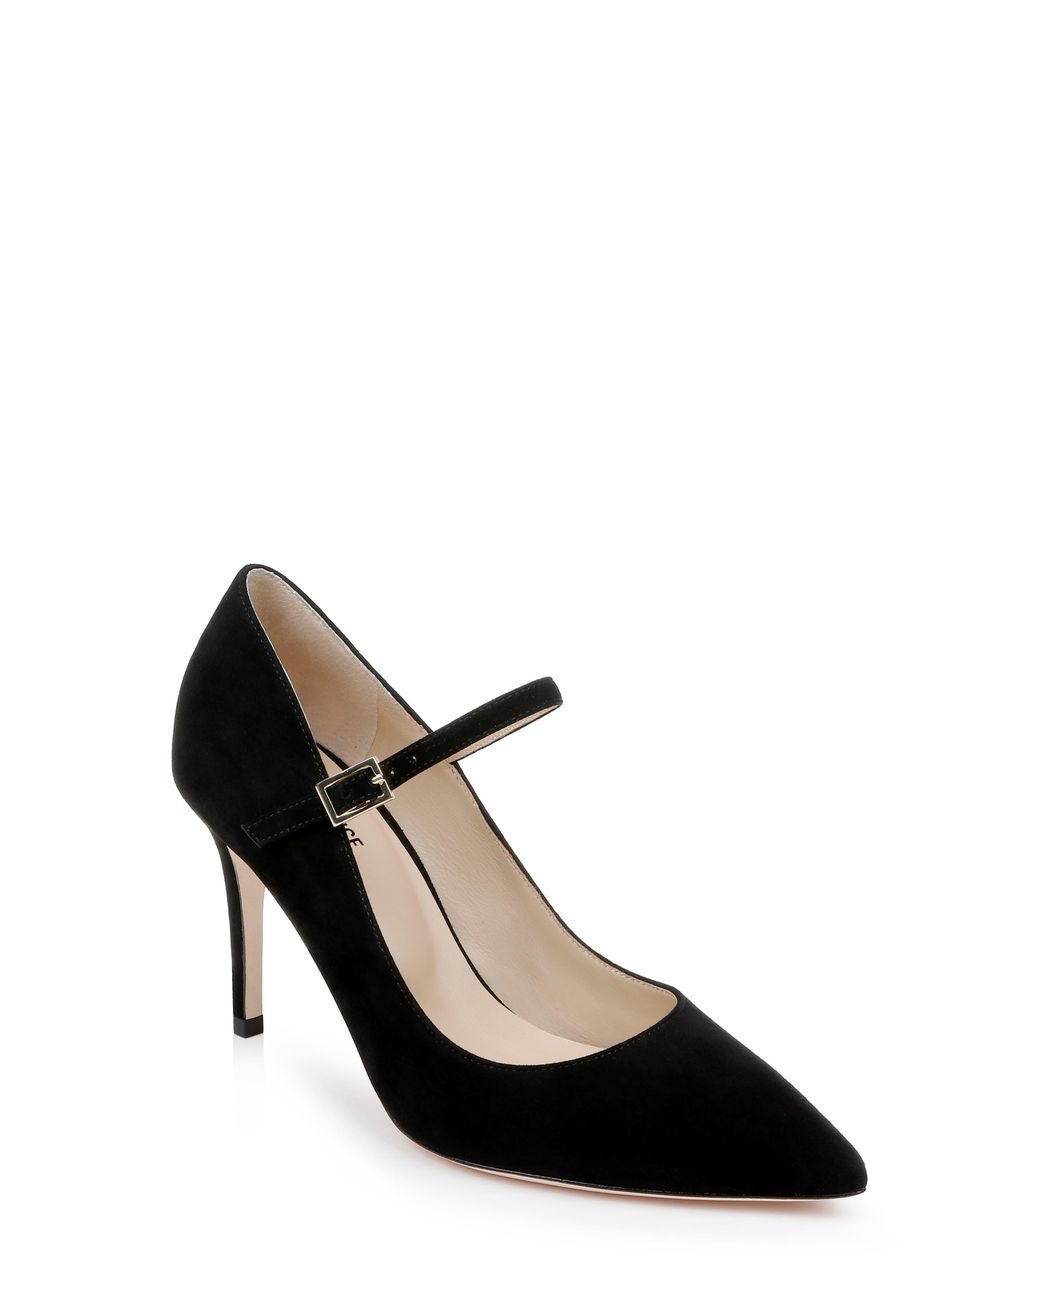 L'Agence Jolie Pointed Toe Pump in Black